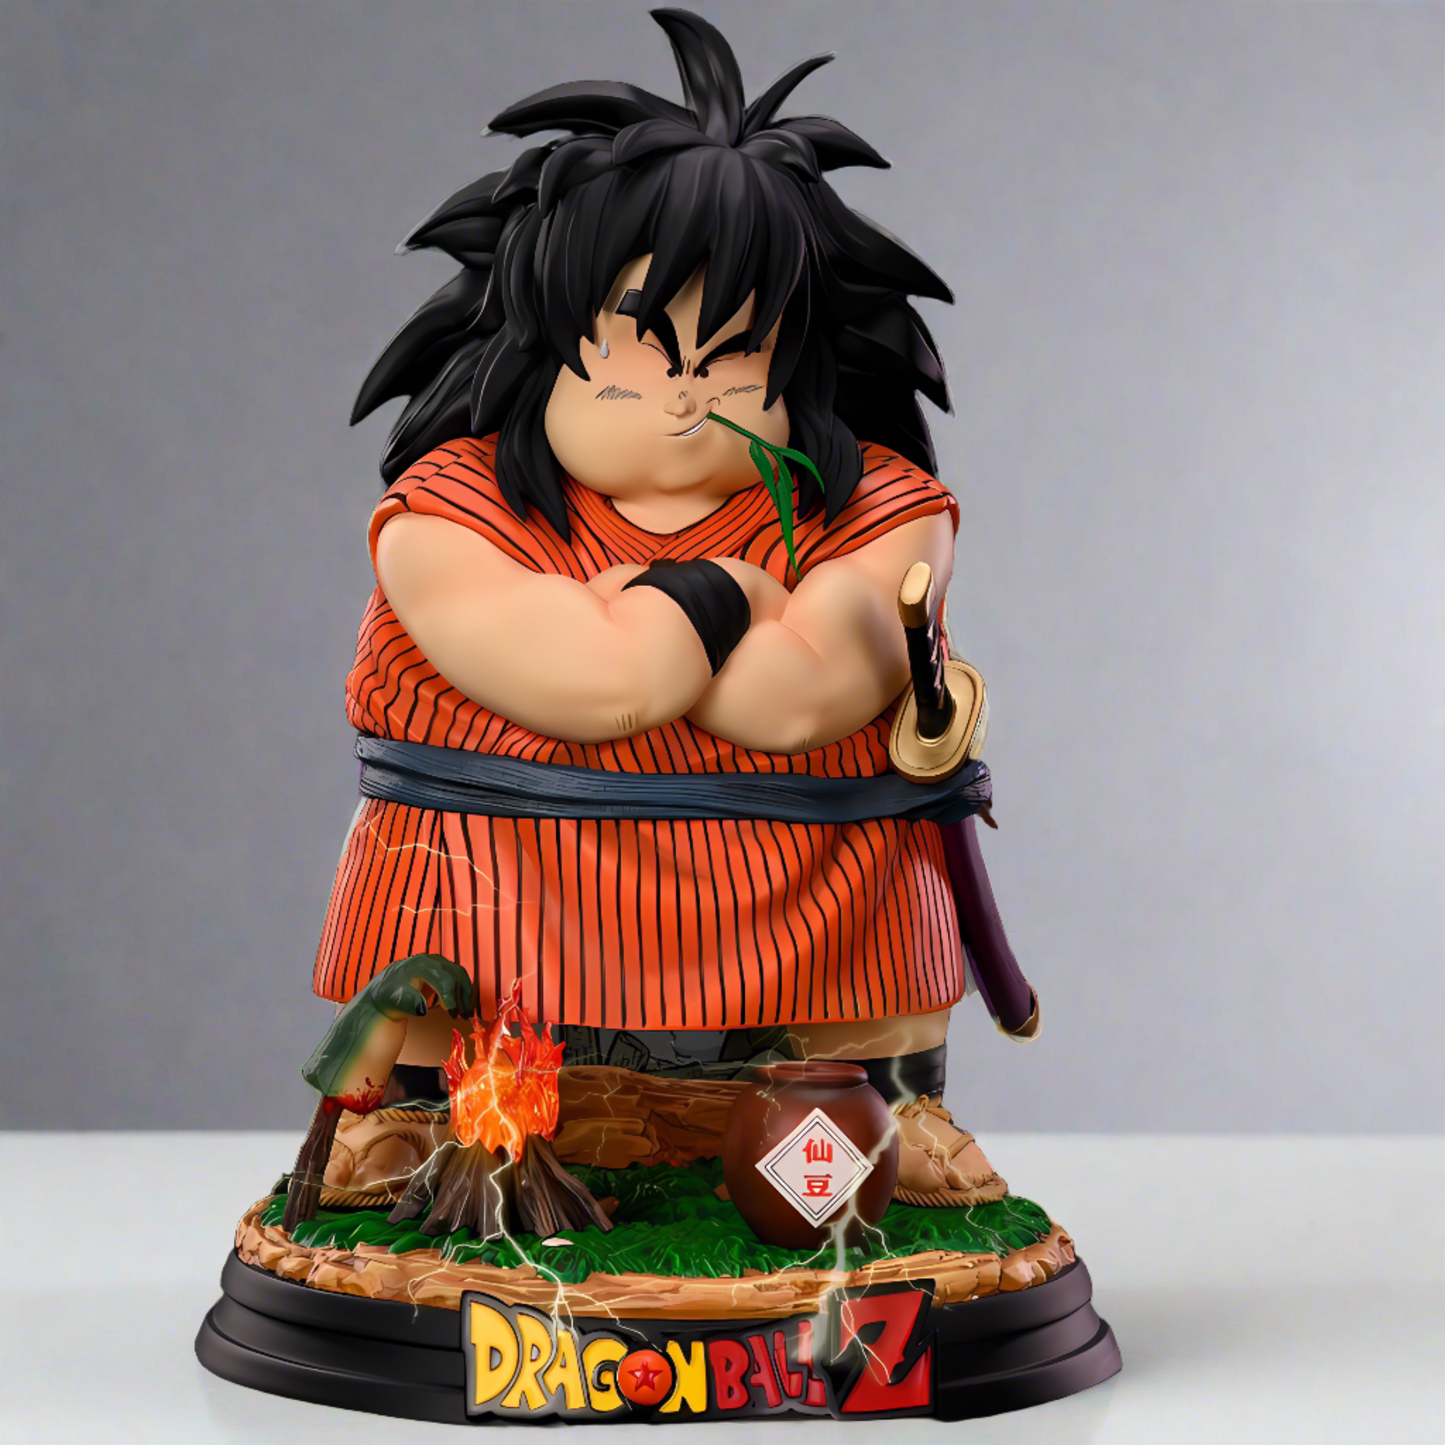 Collectible figure of Yajirobe from Dragon Ball Z, with arms crossed and a sly expression, perched on a base with the show's logo. The figure is presented in front of a comic book-style illustration with action effects.